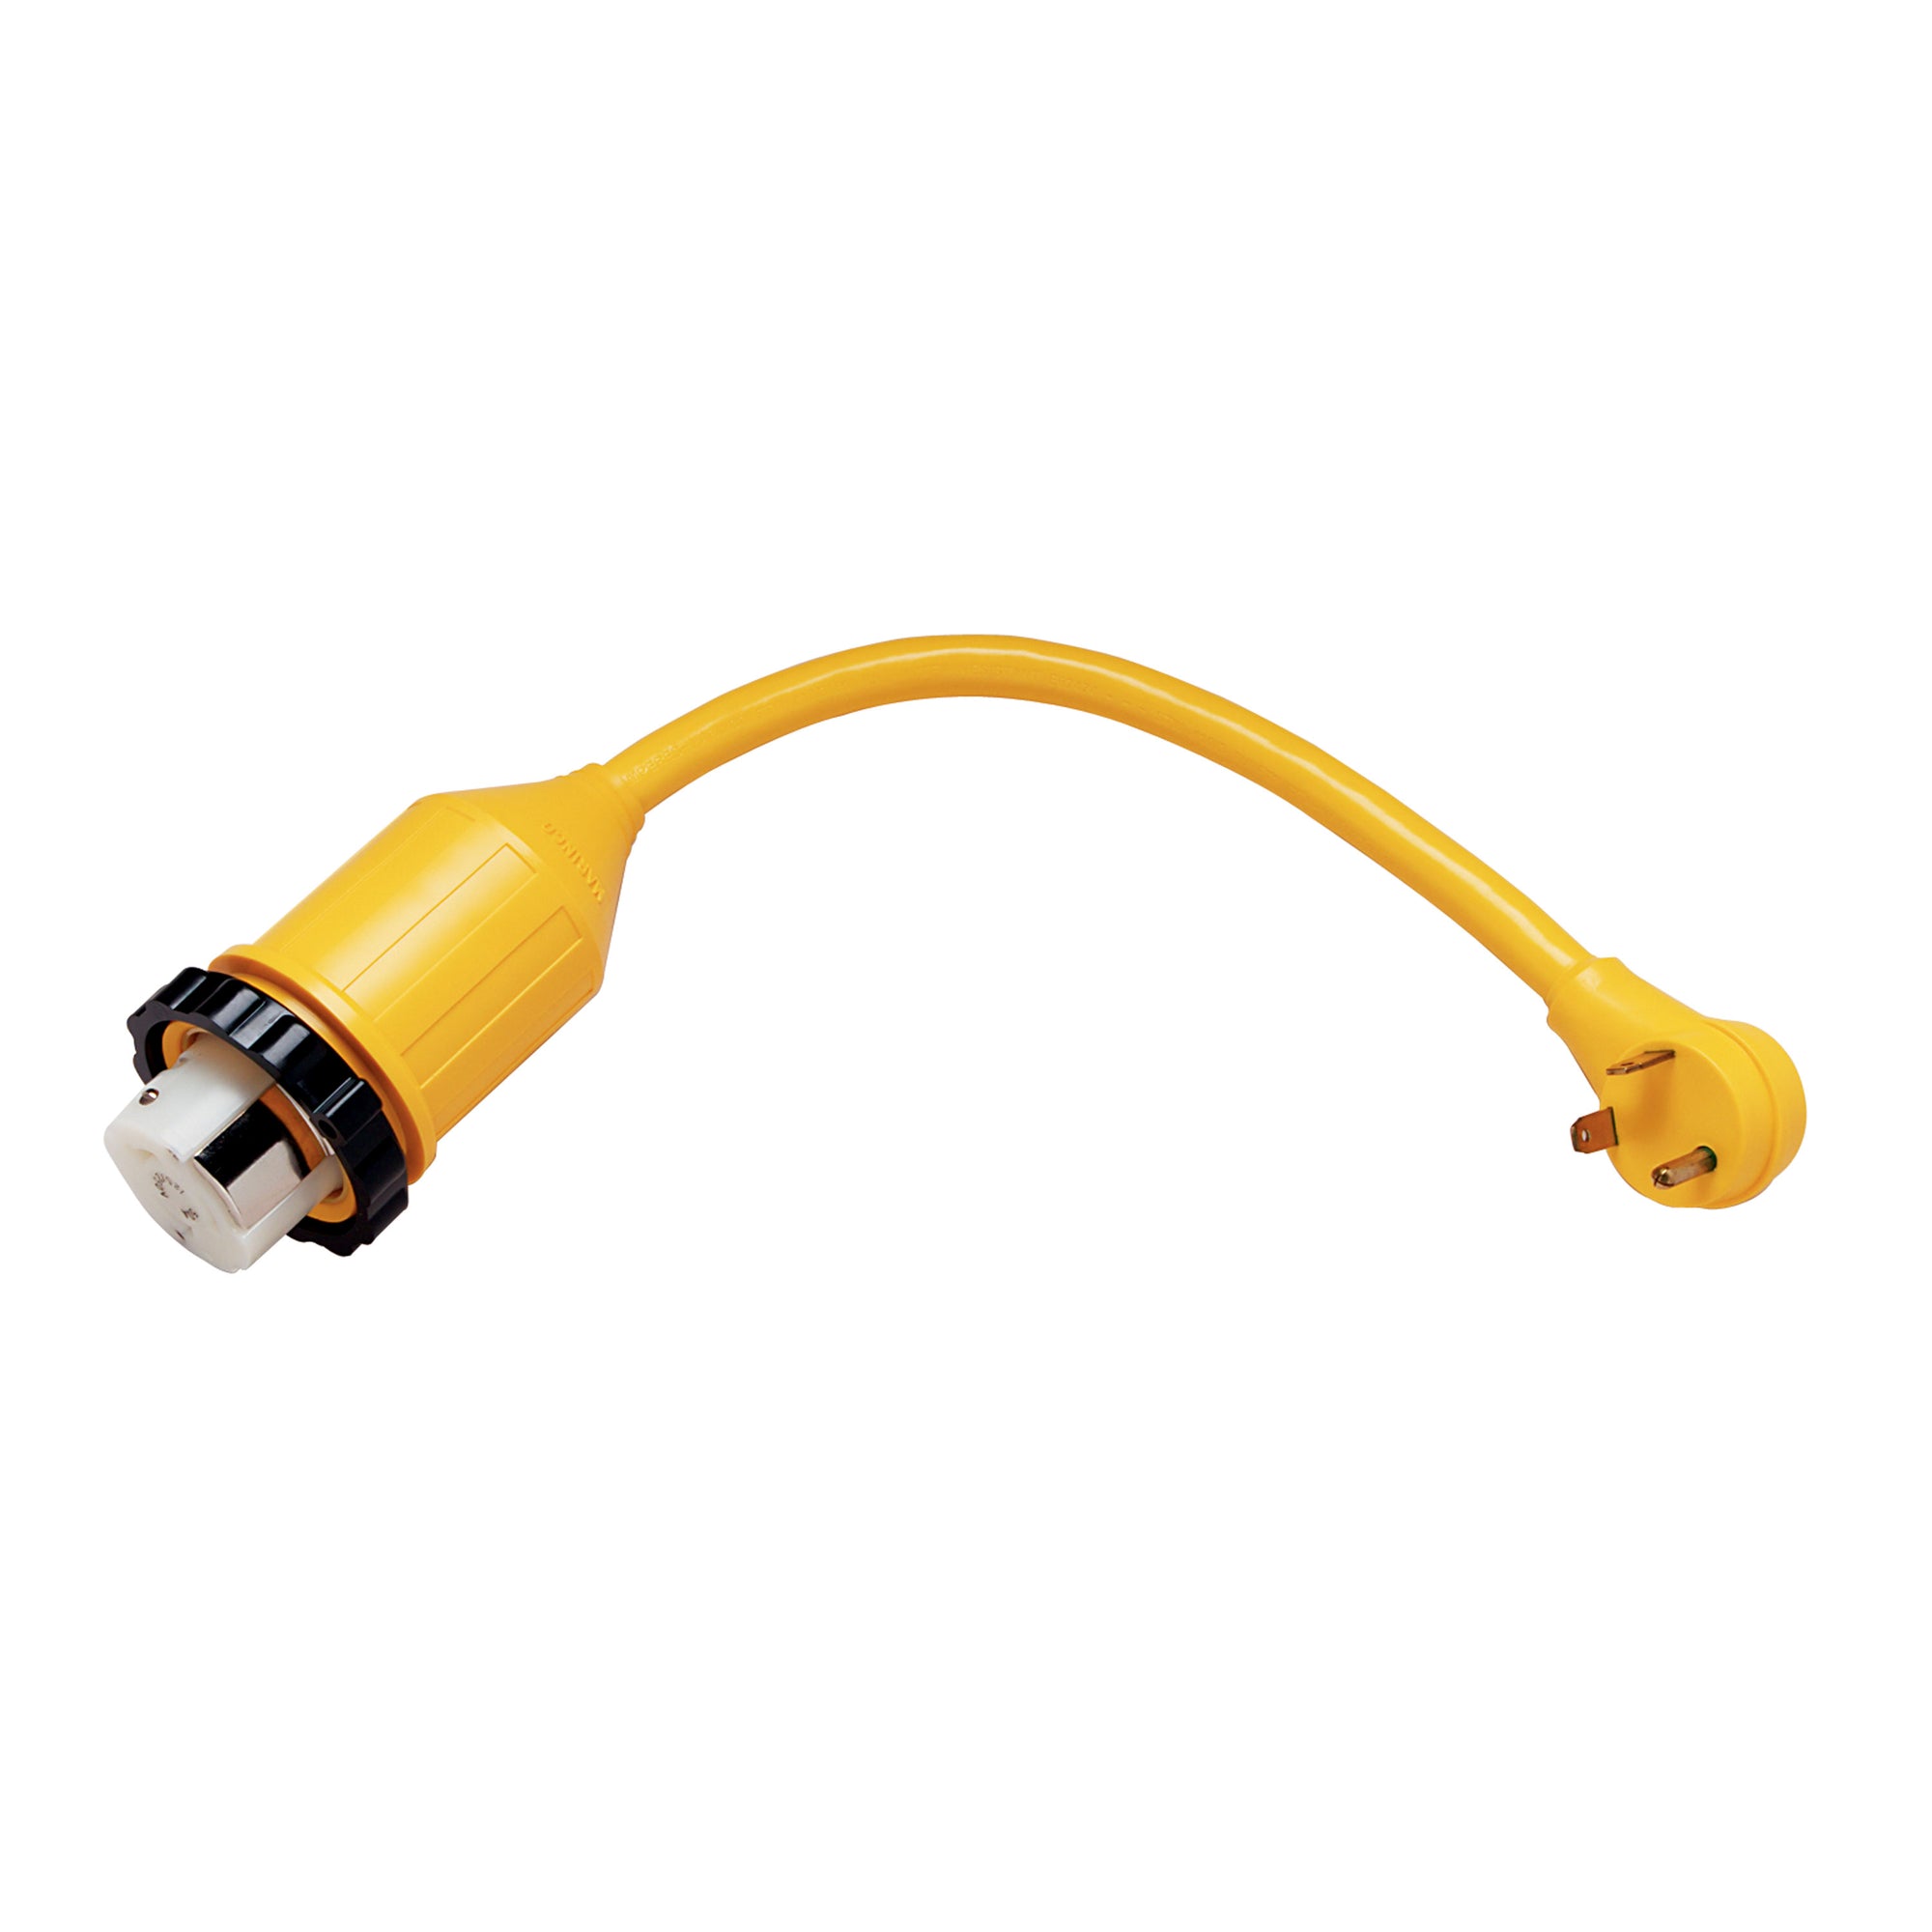 ParkPower 124ARV Pigtail Adapter - 30A Male to 50A Female, 18"